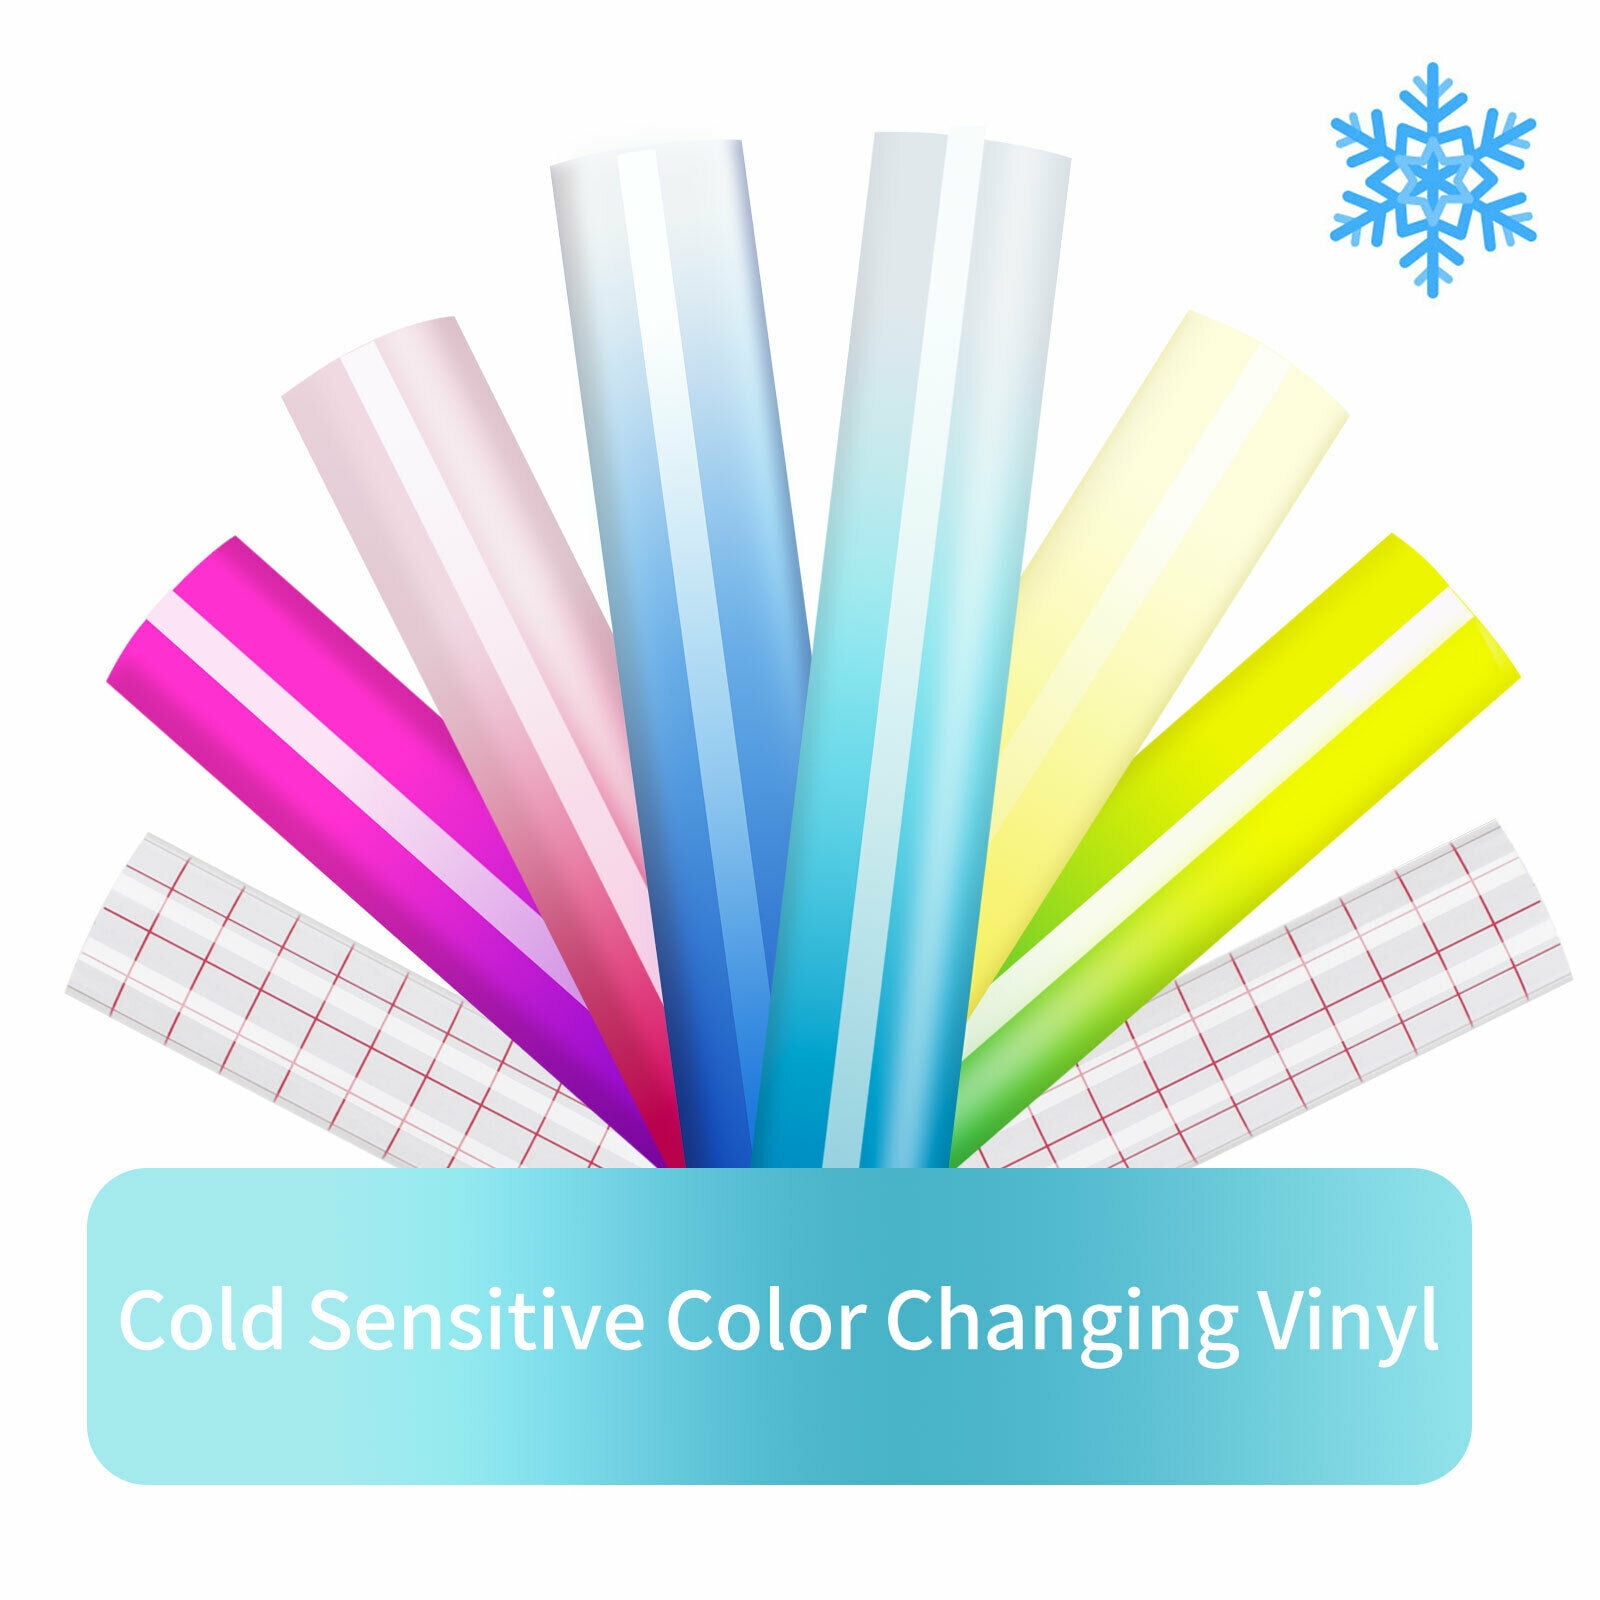 Color Changing Vinyl: How Does It Works and Where To Buy?